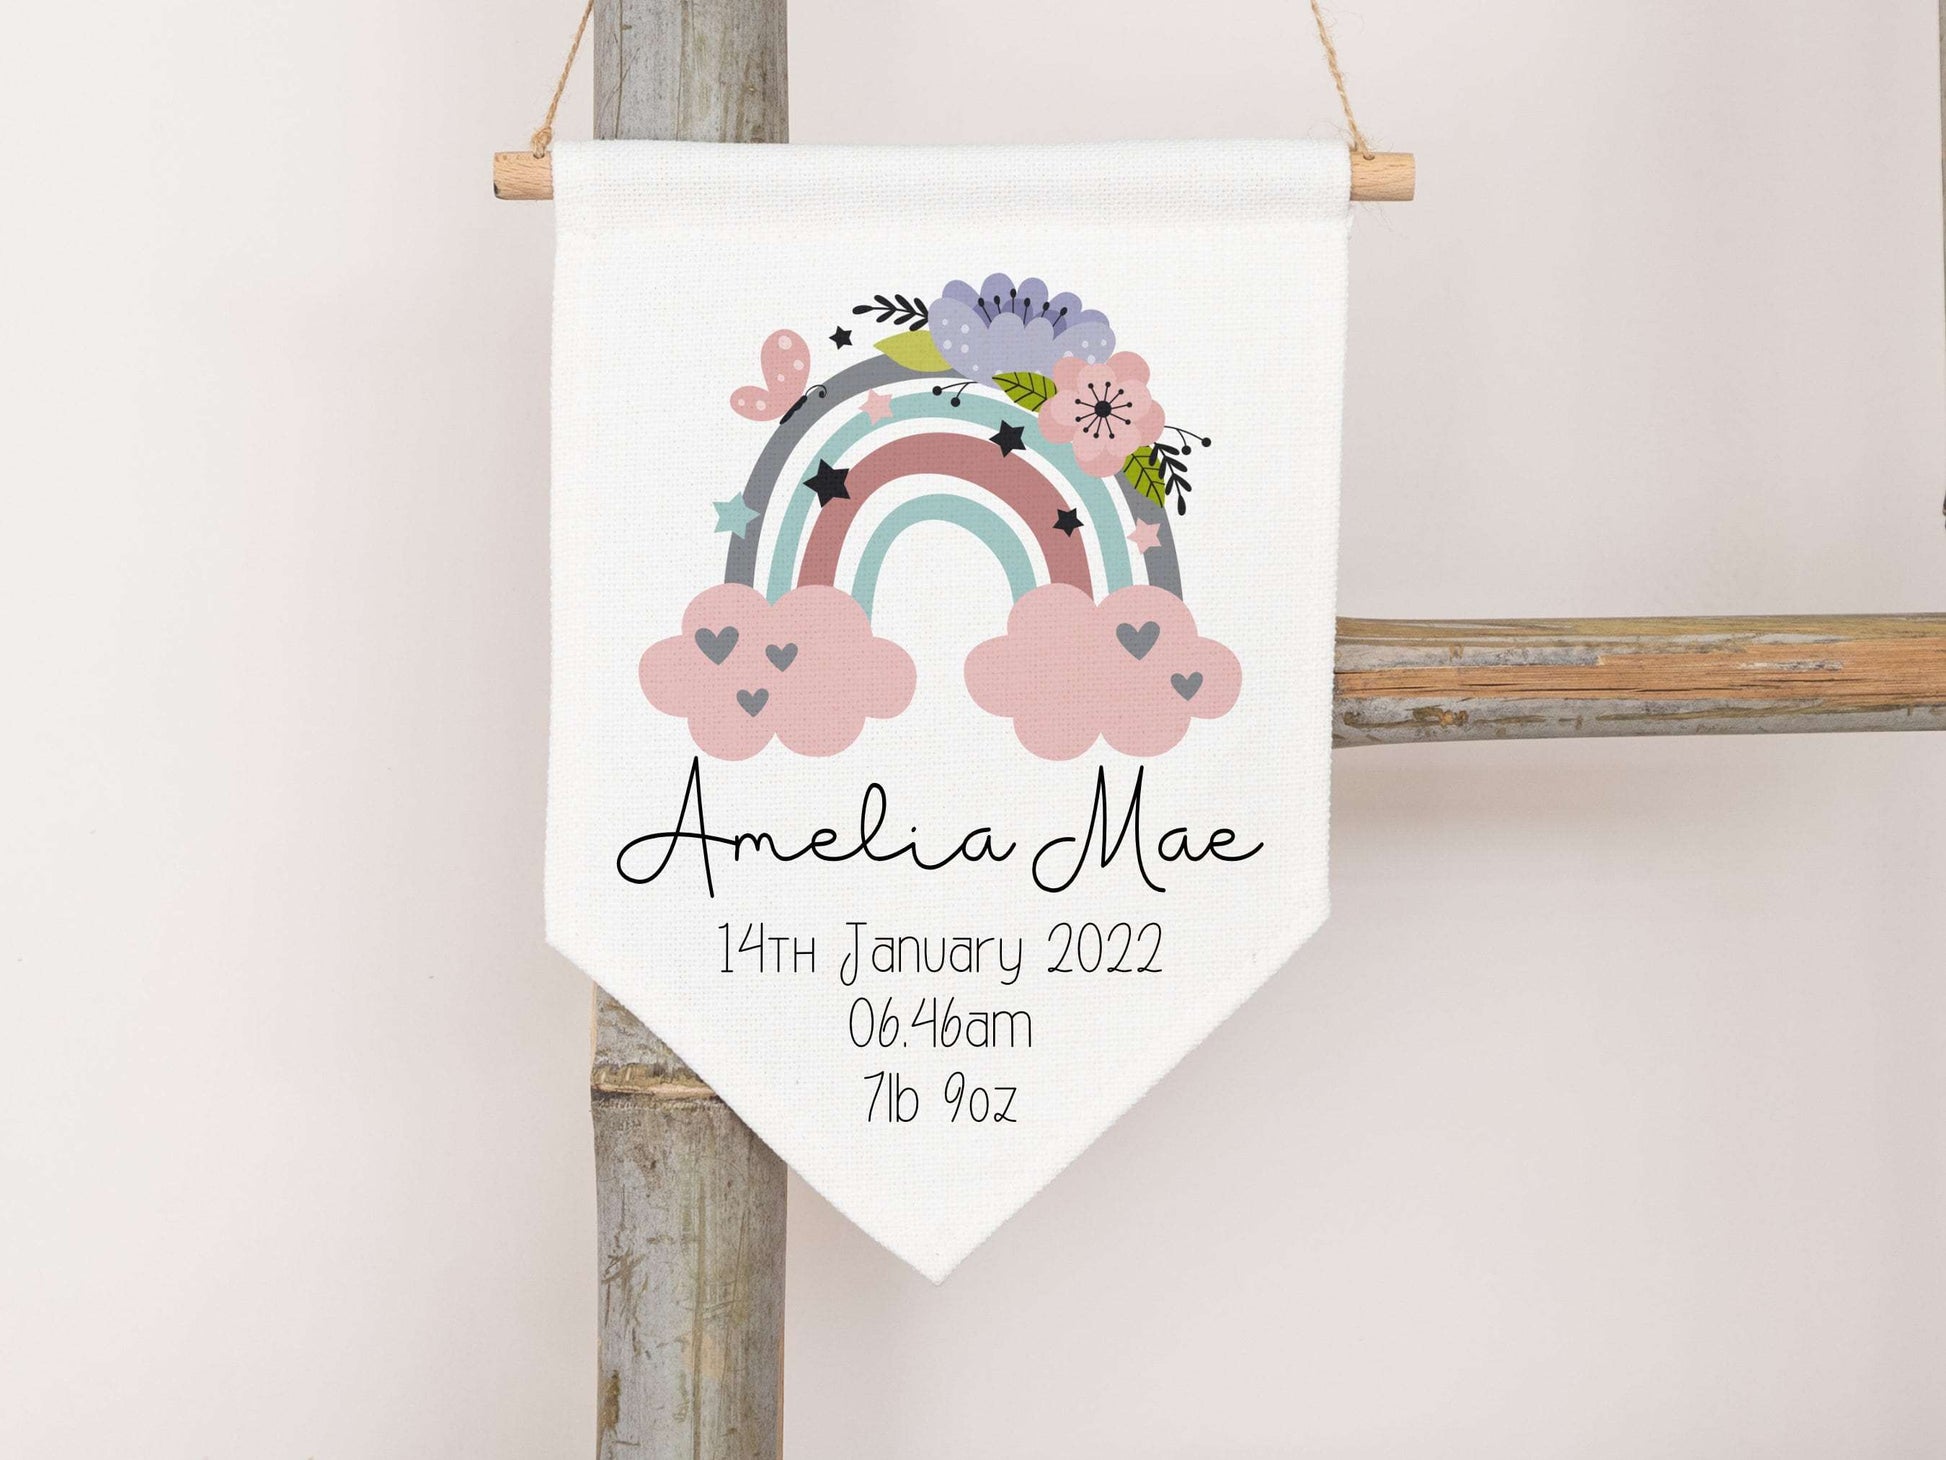 linen flag with floral rainbow design printed on with a name and birth details below